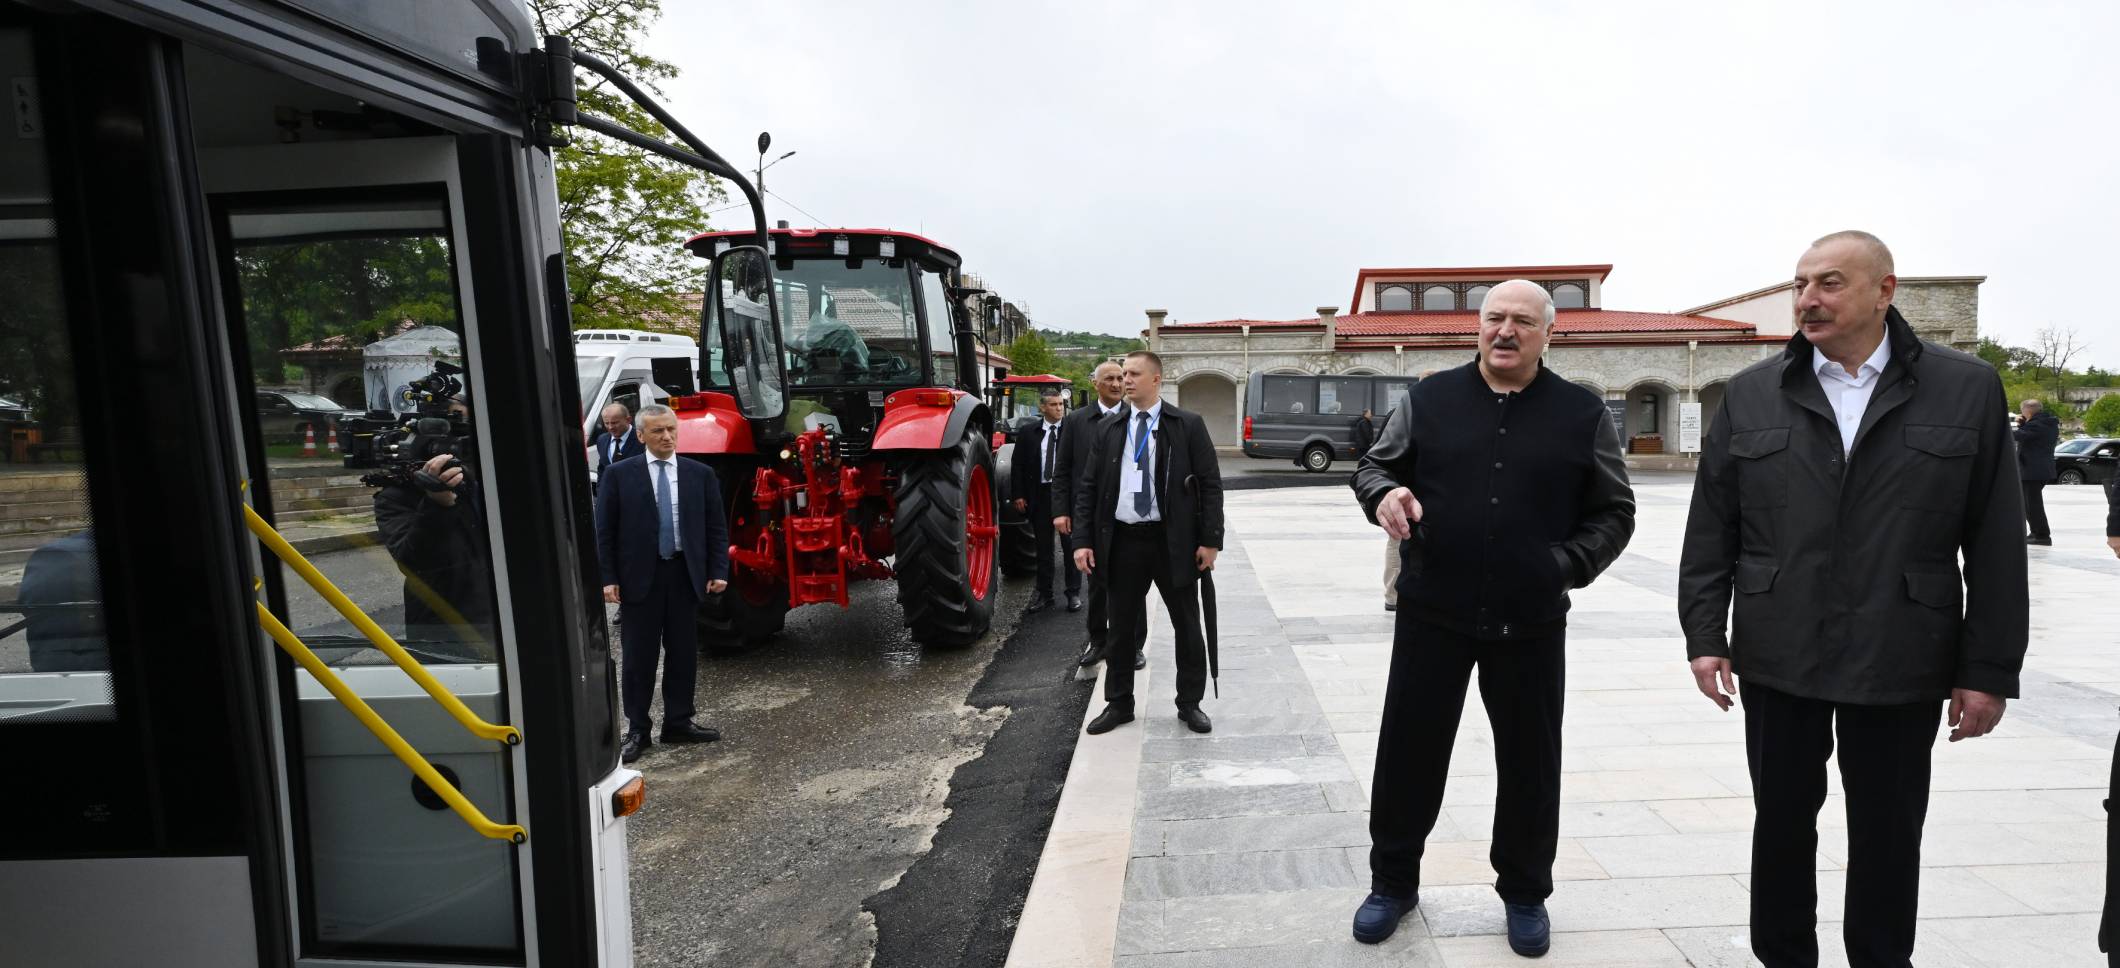 Ilham Aliyev and Aleksandr Lukashenko viewed bus jointly manufactured by Azerbaijan and Belarus, as well as tractors presented by the Belarusian President